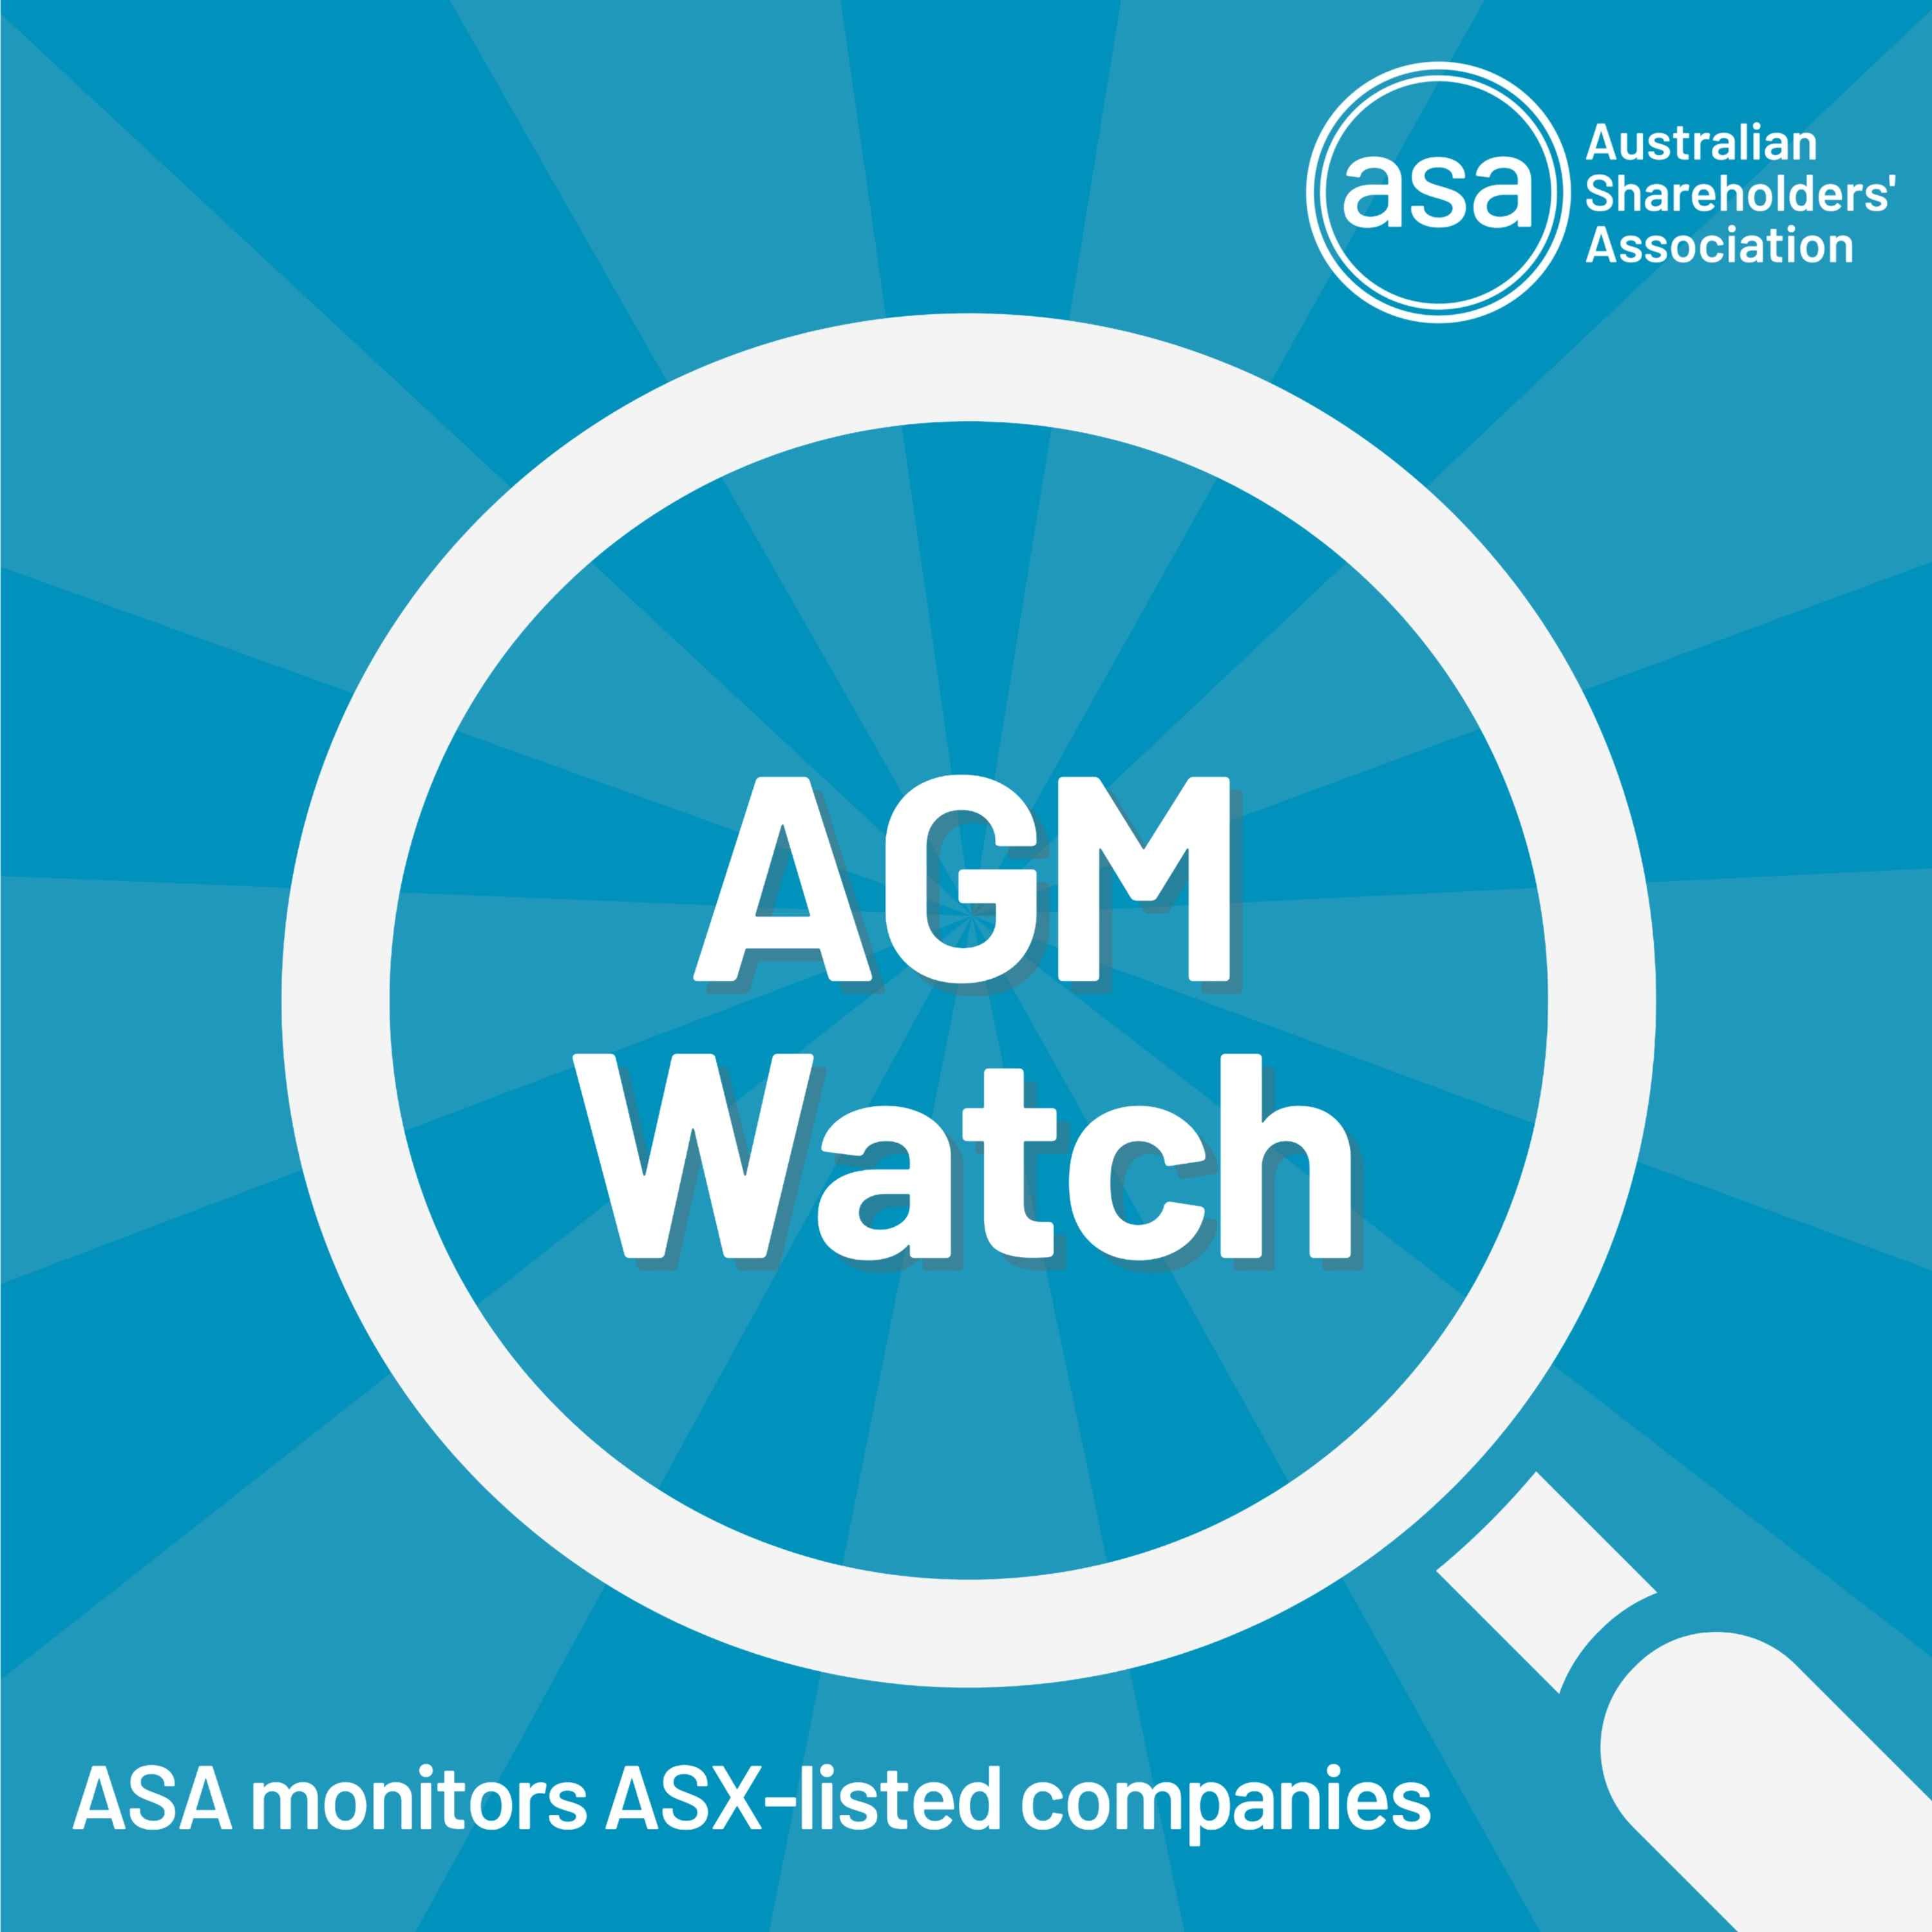 AGM Watch 2021 - Overview with Fiona Balzer